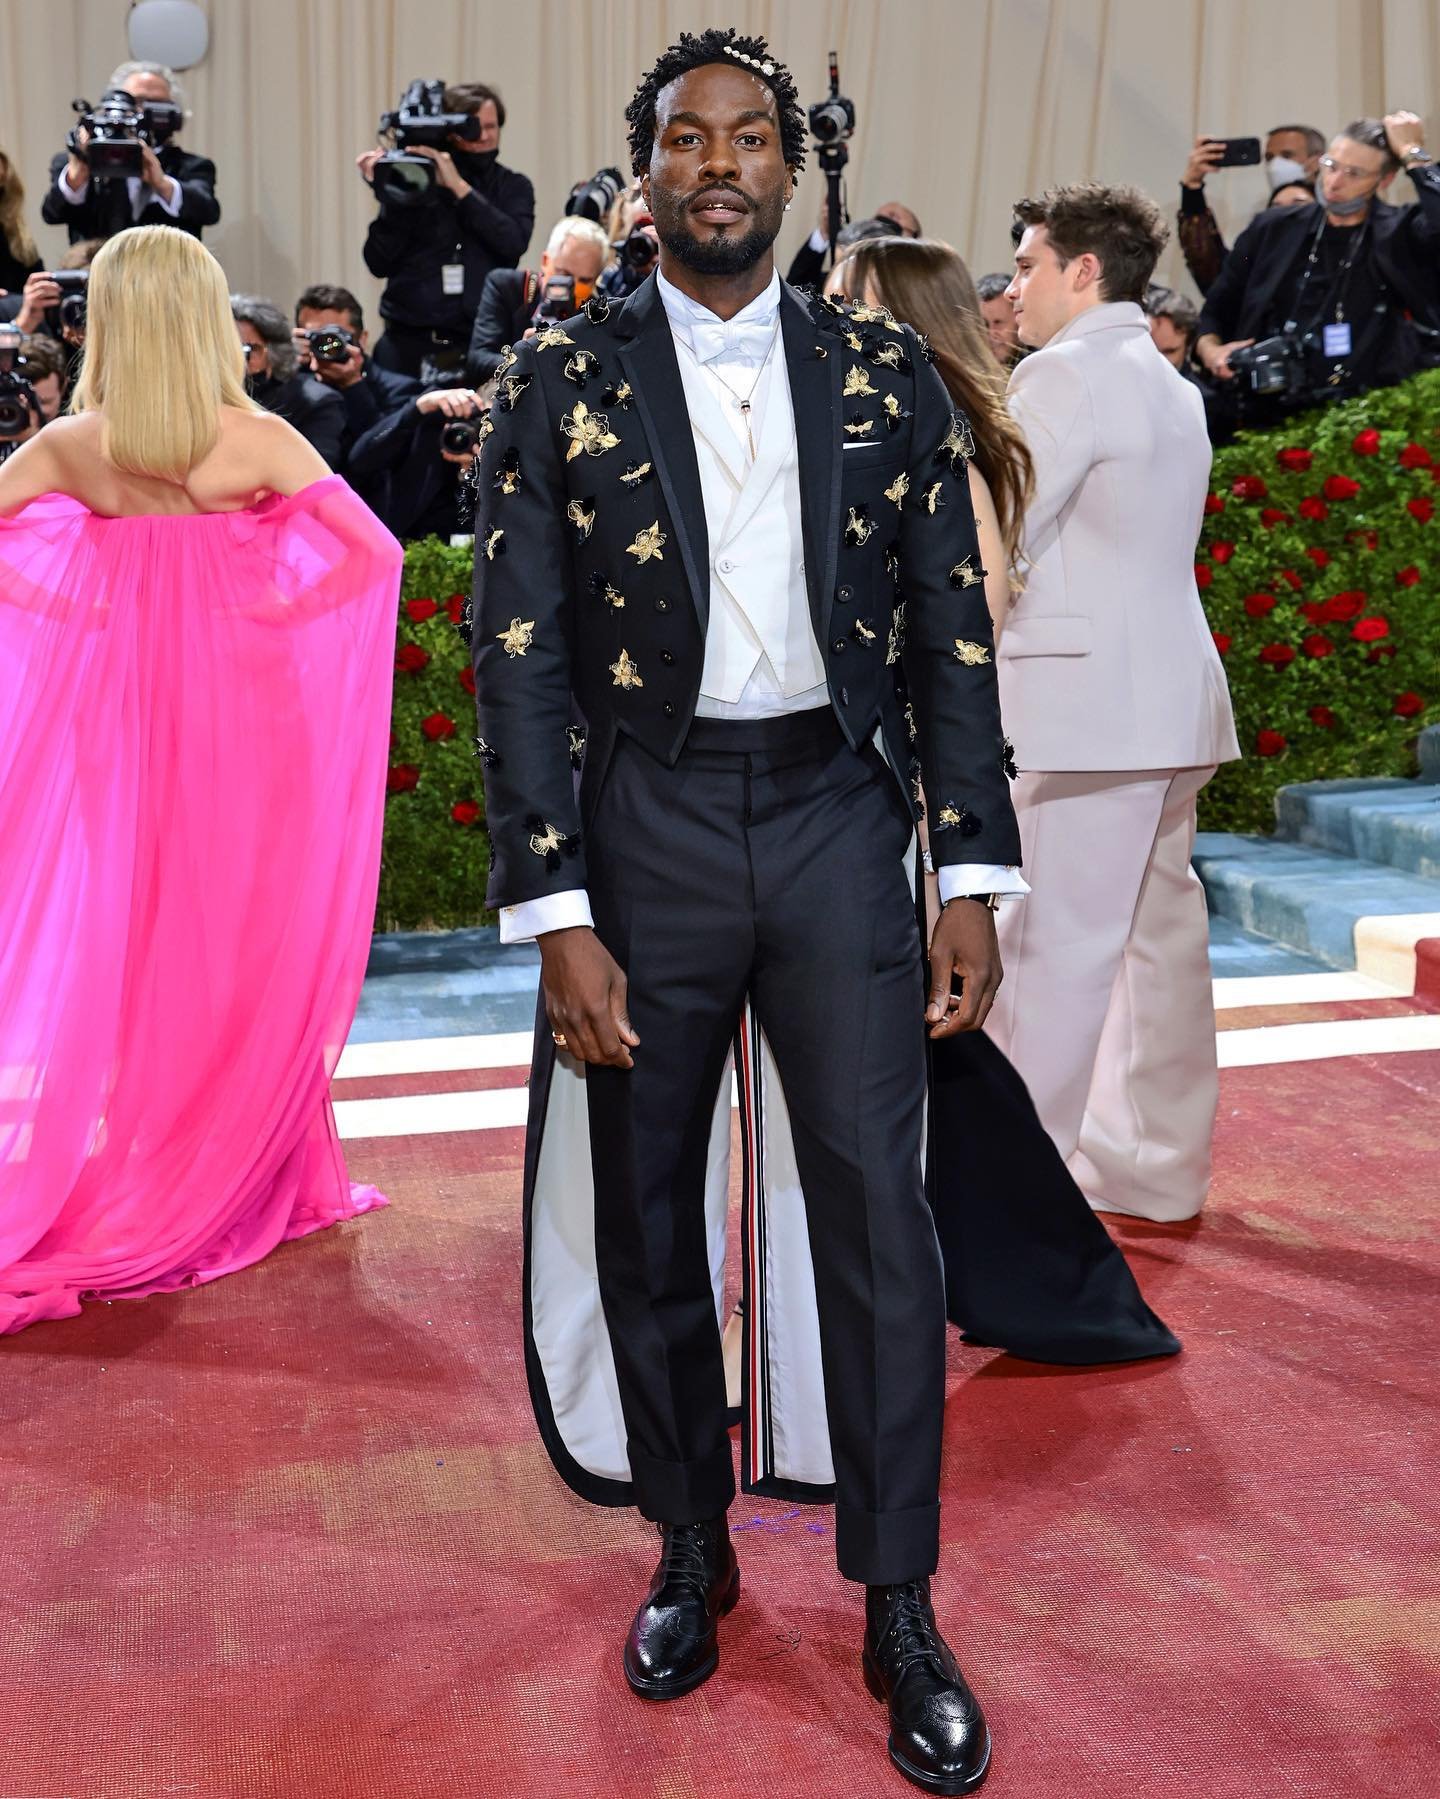 Yahya Abdul-Mateen II is an elongated floor length tailcoat in 3-ply mohair with orchids &amp; laurel leaves embroidery in gold bullion, tuxedo trousers in mohair &amp; wing collar shirt.